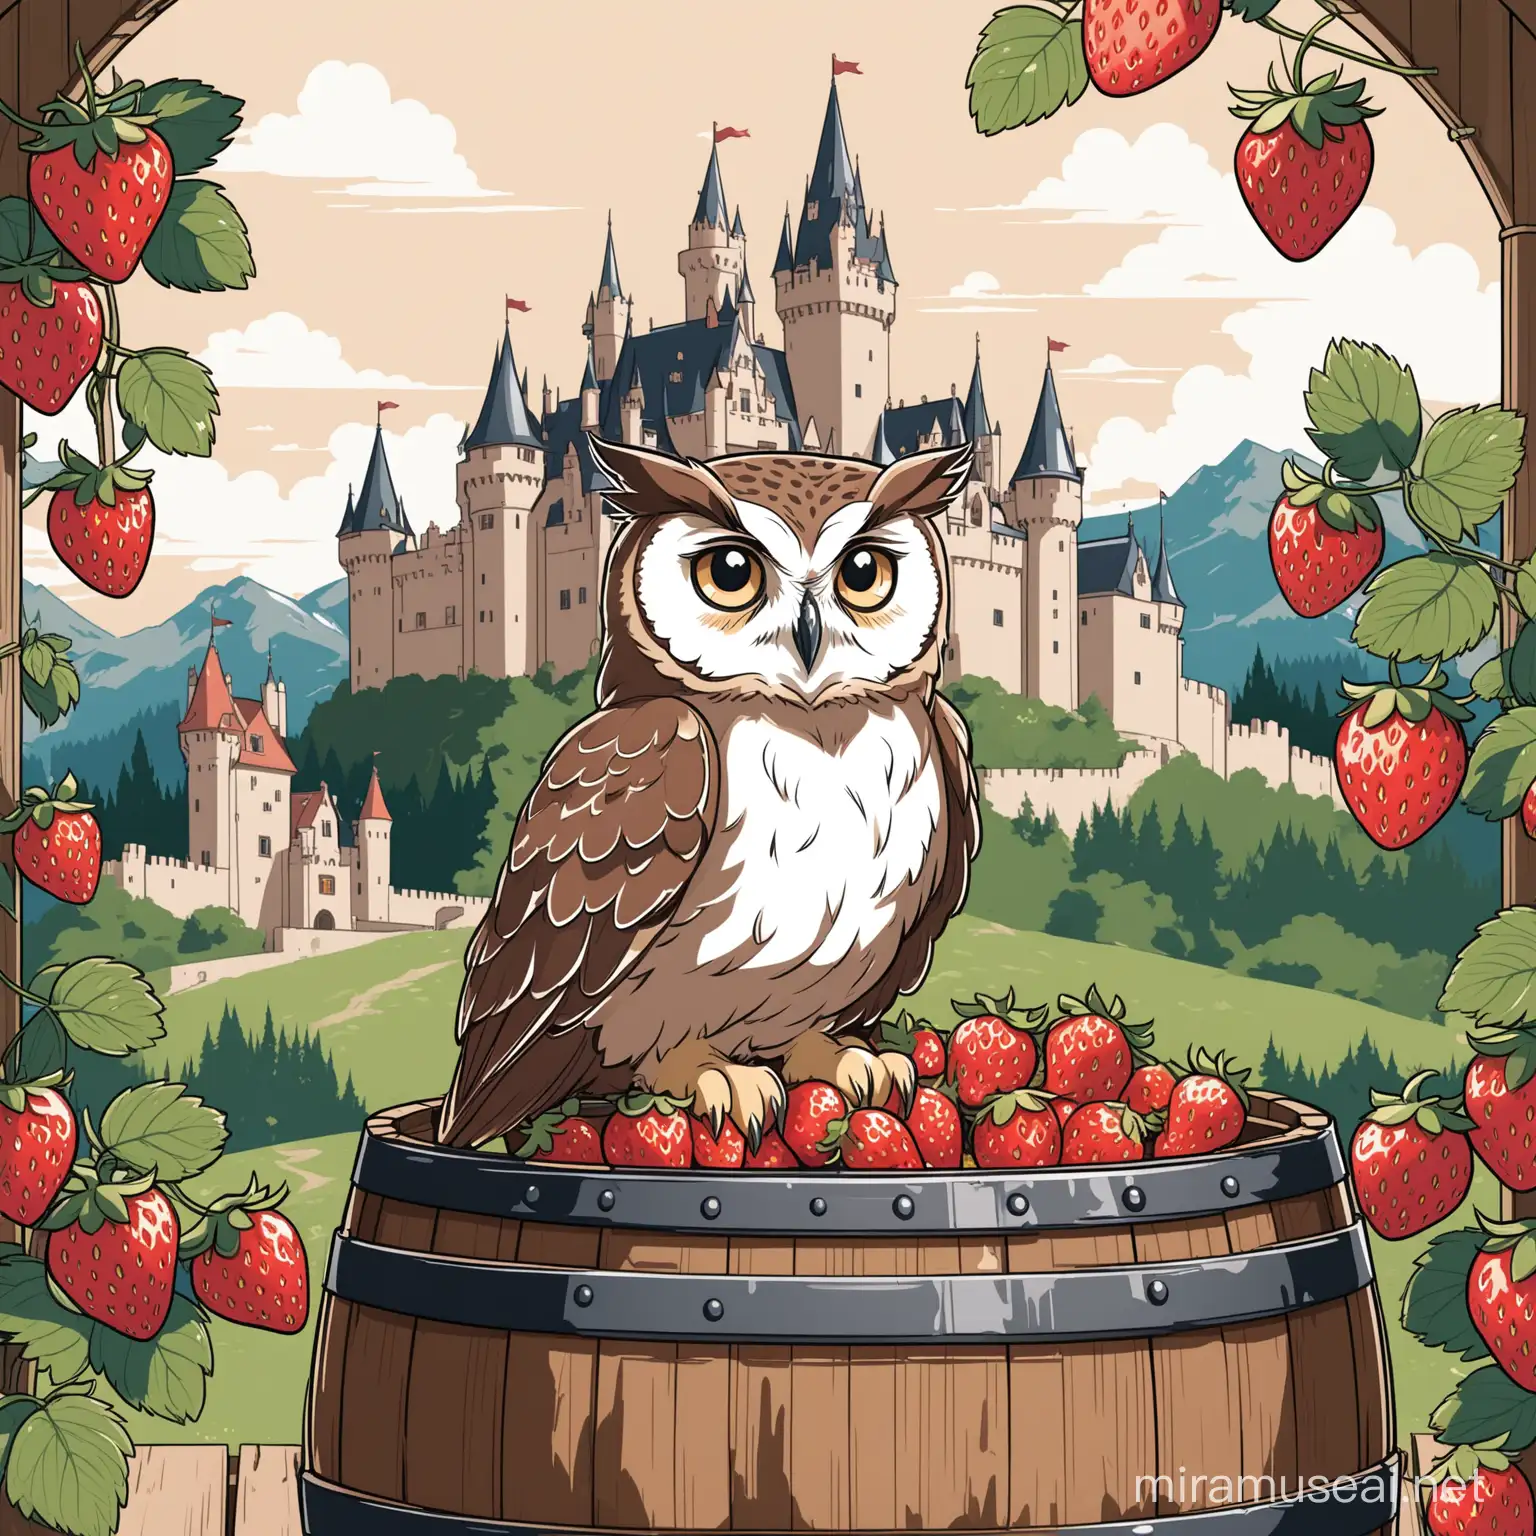 Owl Perched on Whiskey Barrel Near Castle with Strawberry Baskets